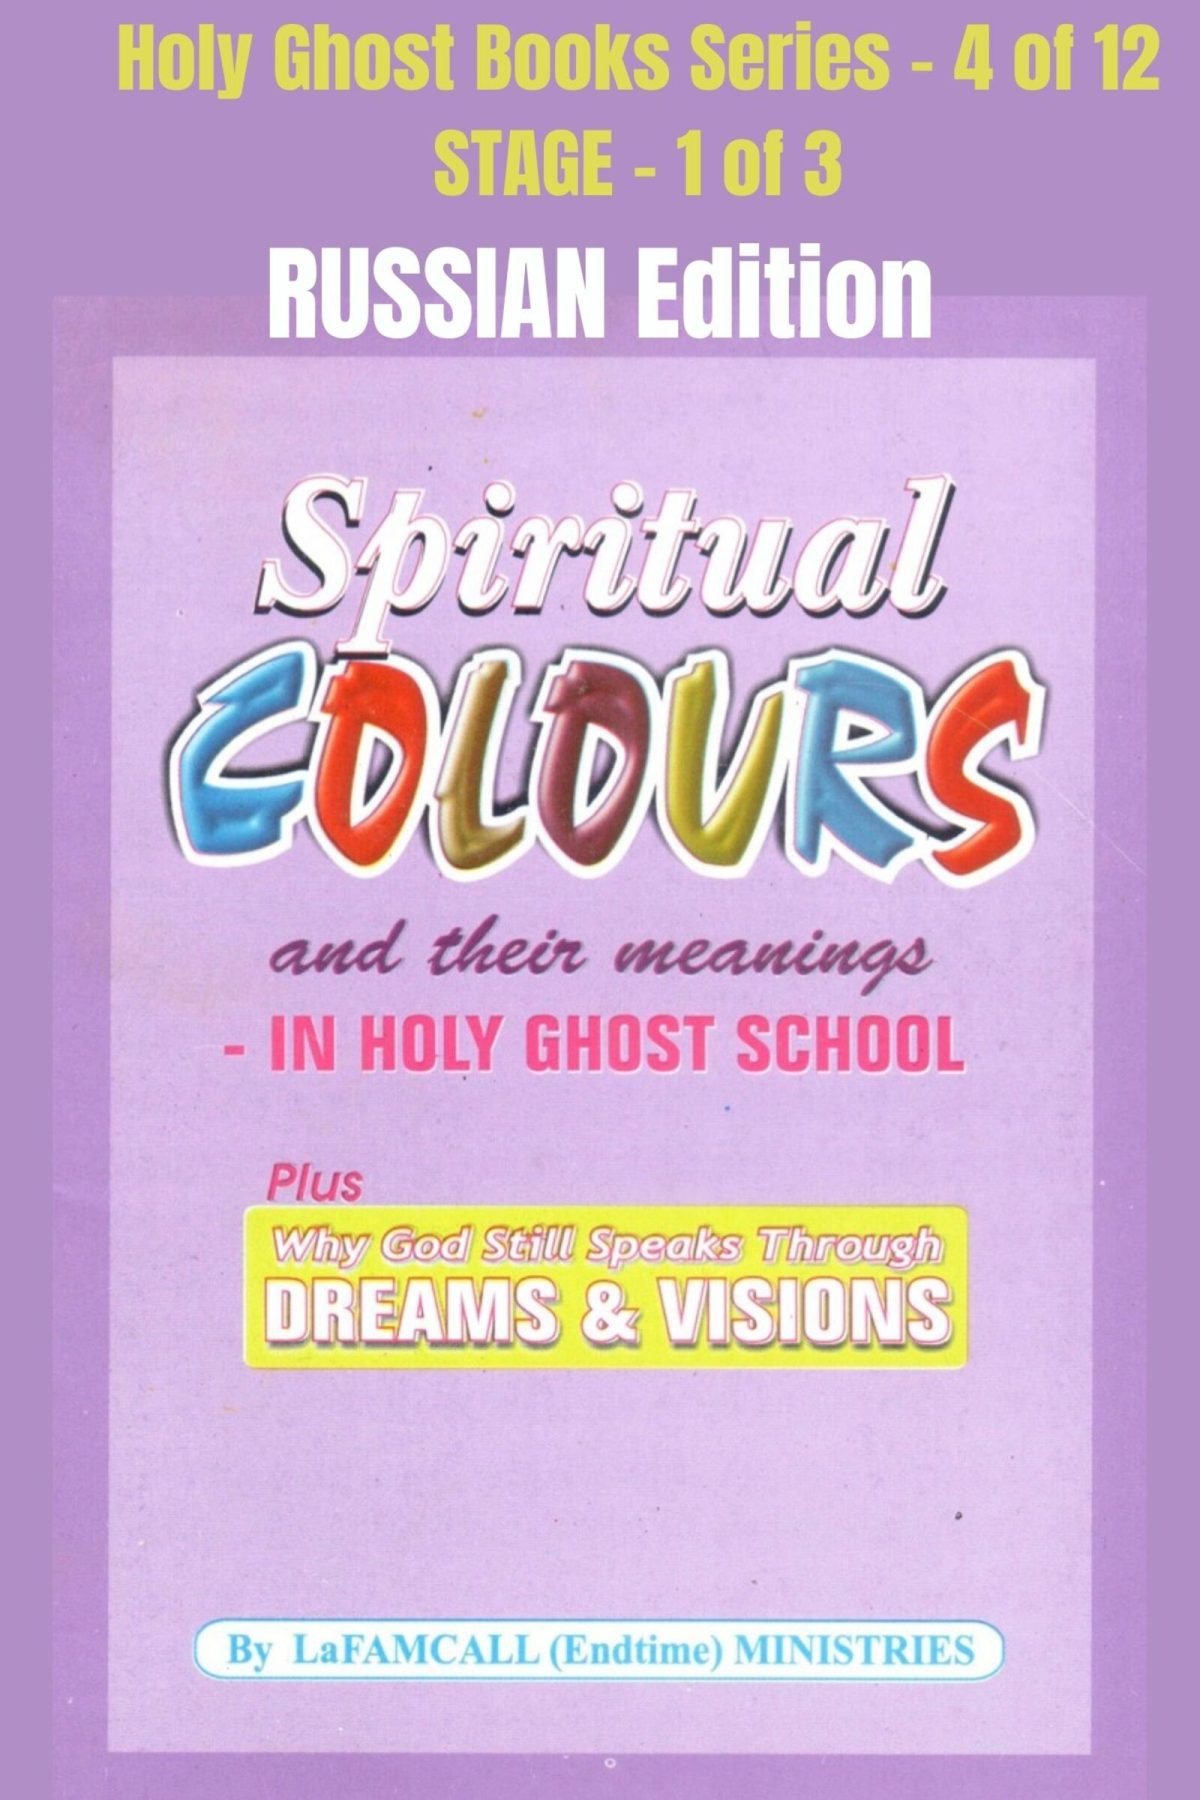 Spiritual Colours Russian - Spiritual colours and their meanings - Why God still Speaks Through Dreams and visions - RUSSIAN EDITION - Ebook School of the Holy Spirit Series 4 of 12, Stage 1 of 3